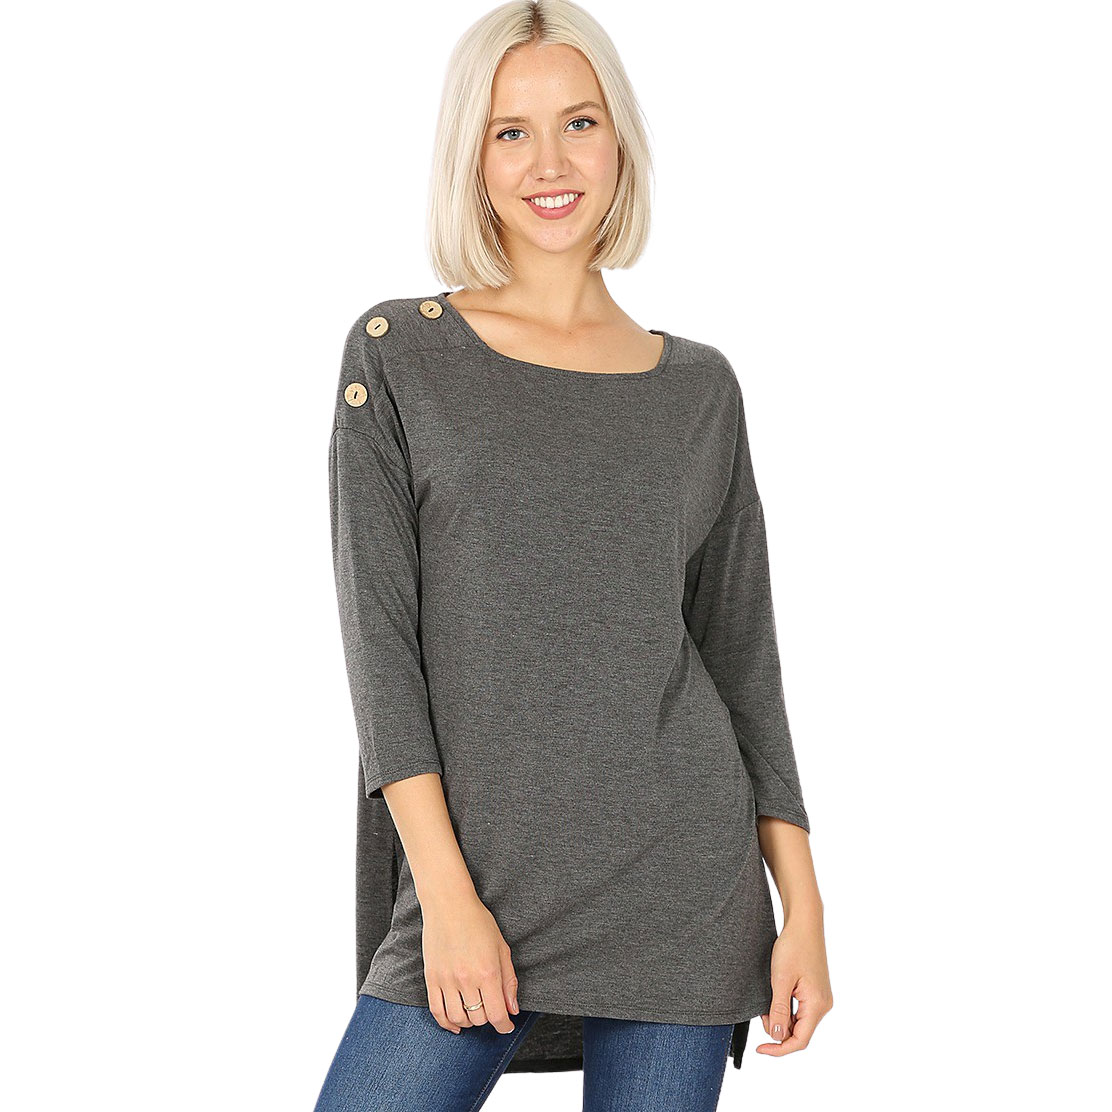 CHARCOAL Boat Neck Hi-Lo Top w/ Wooden Buttons 2082